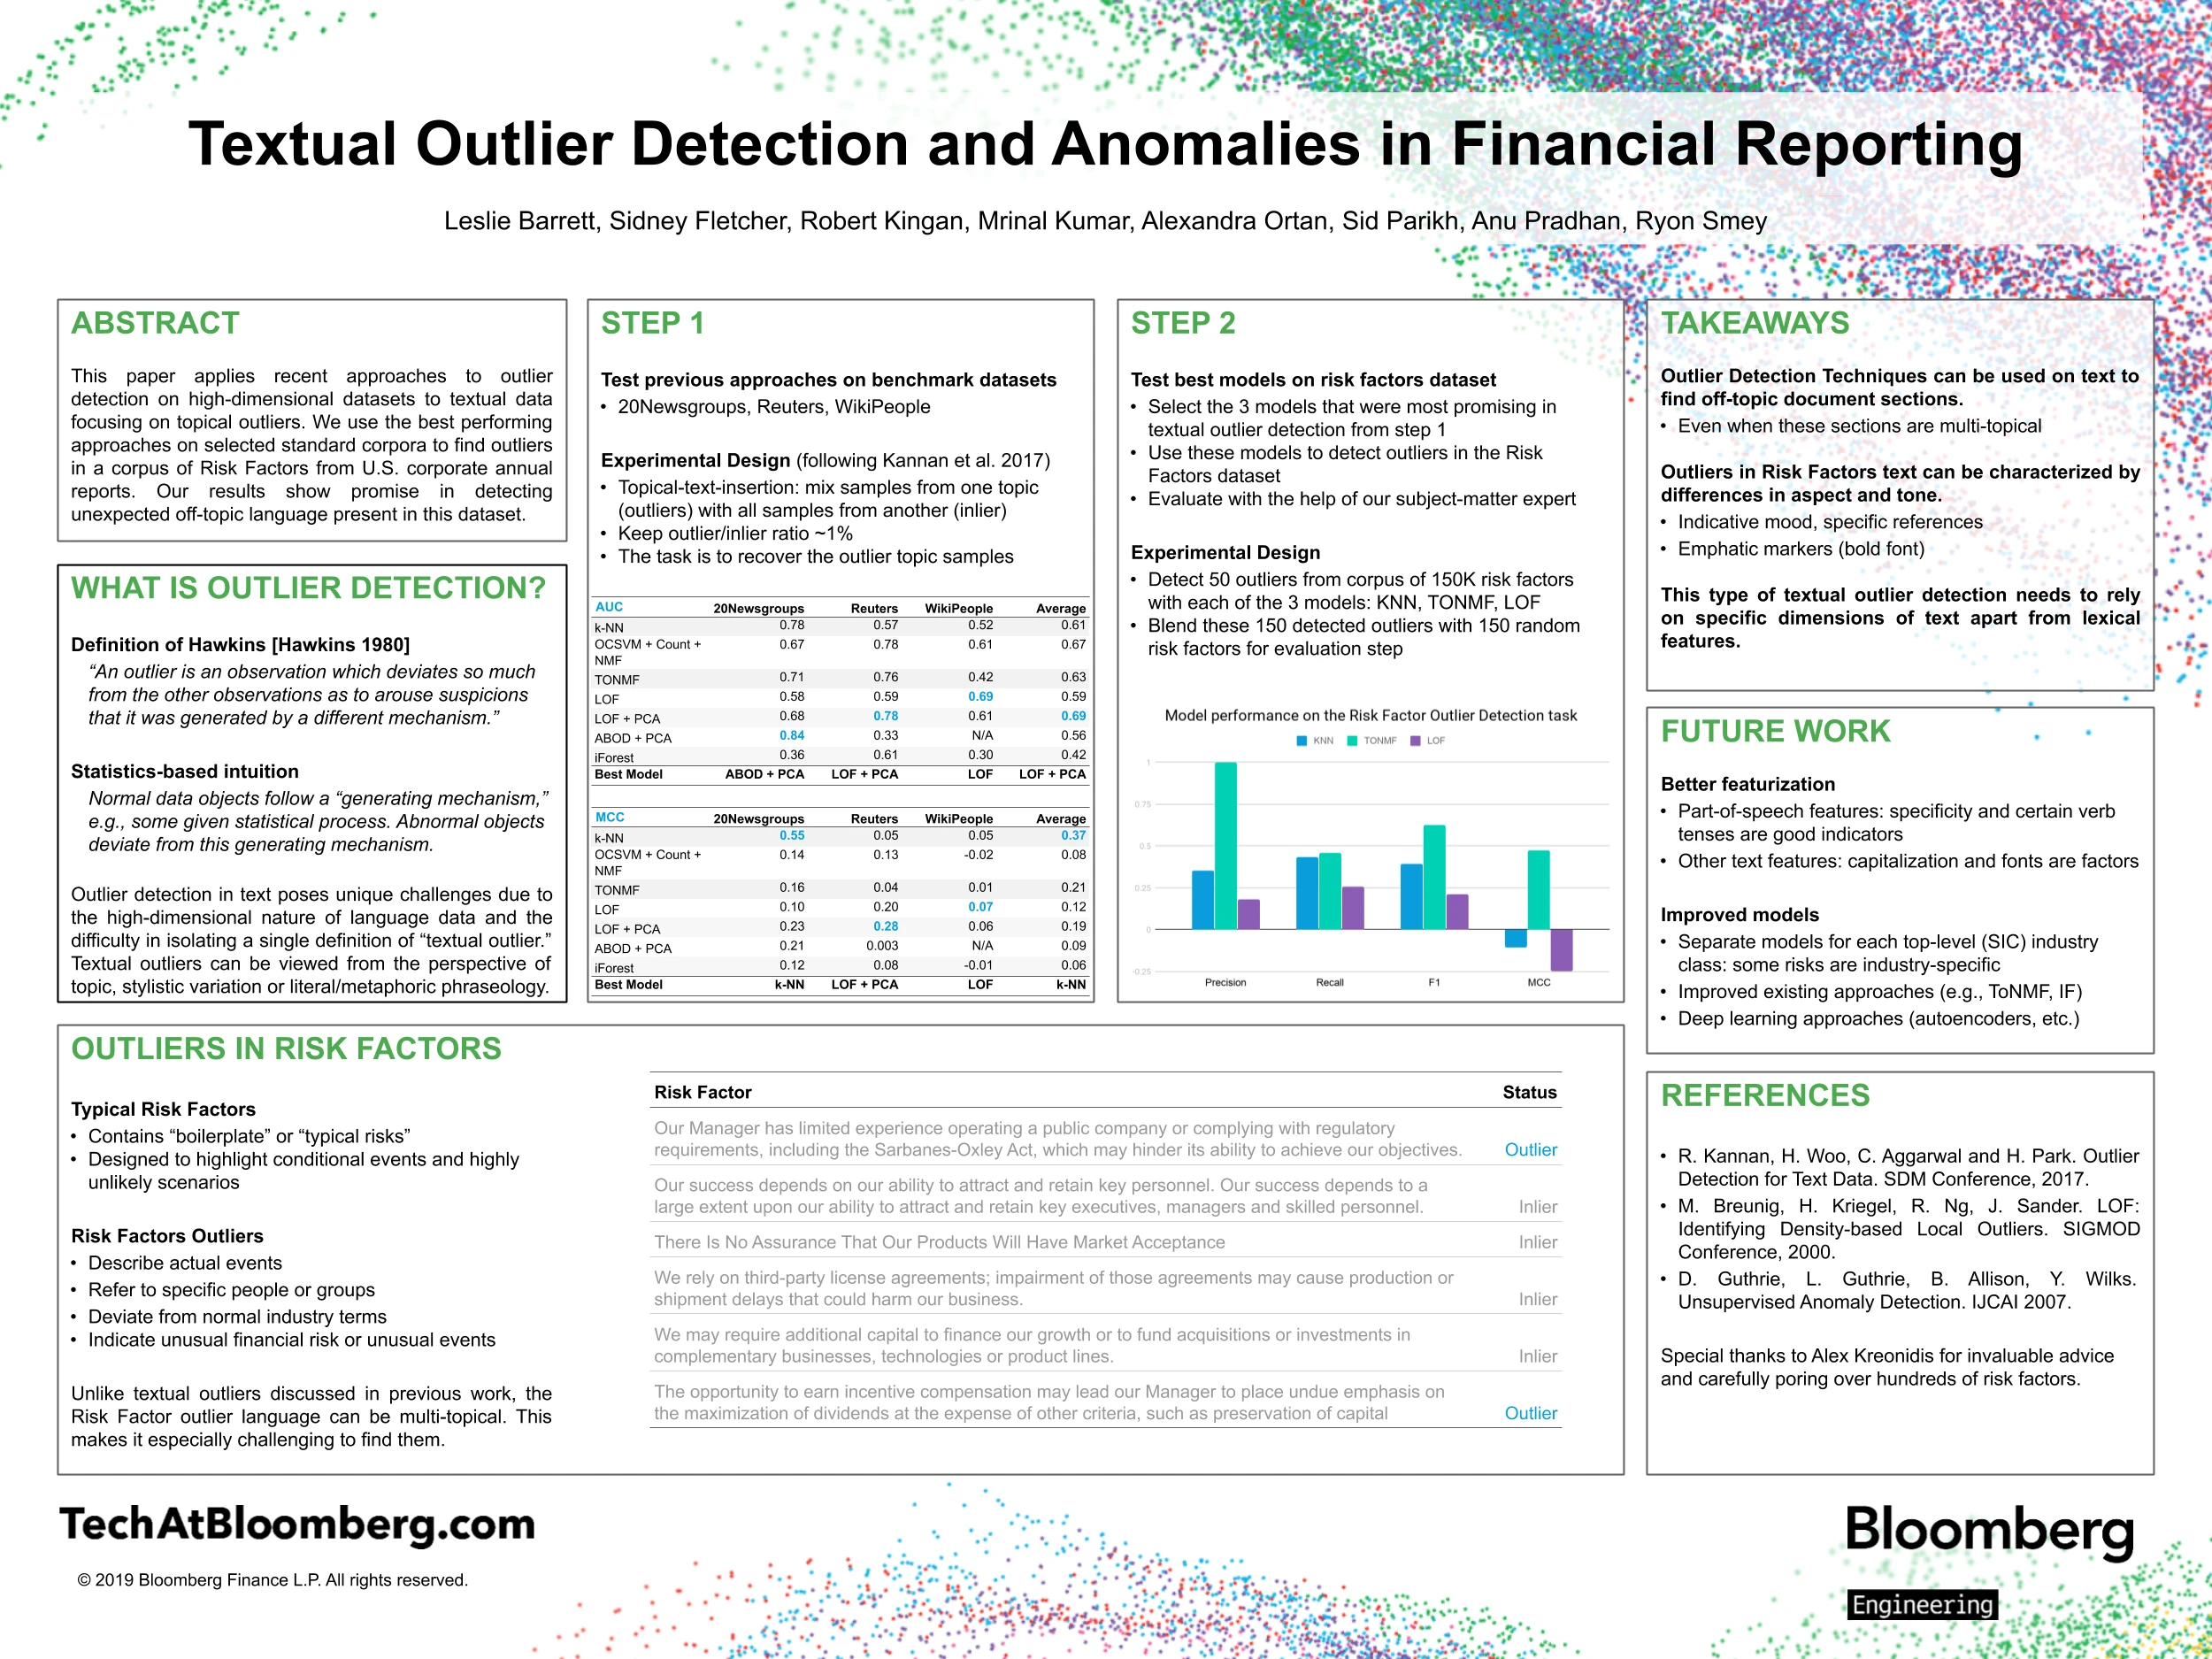 A poster for Textual Outlier Detection and Anomalies in Financial Reporting, which details two steps it took, along with its abstract, what outlier detection is, outliers in its risk factors, takeaways, future work, and references.